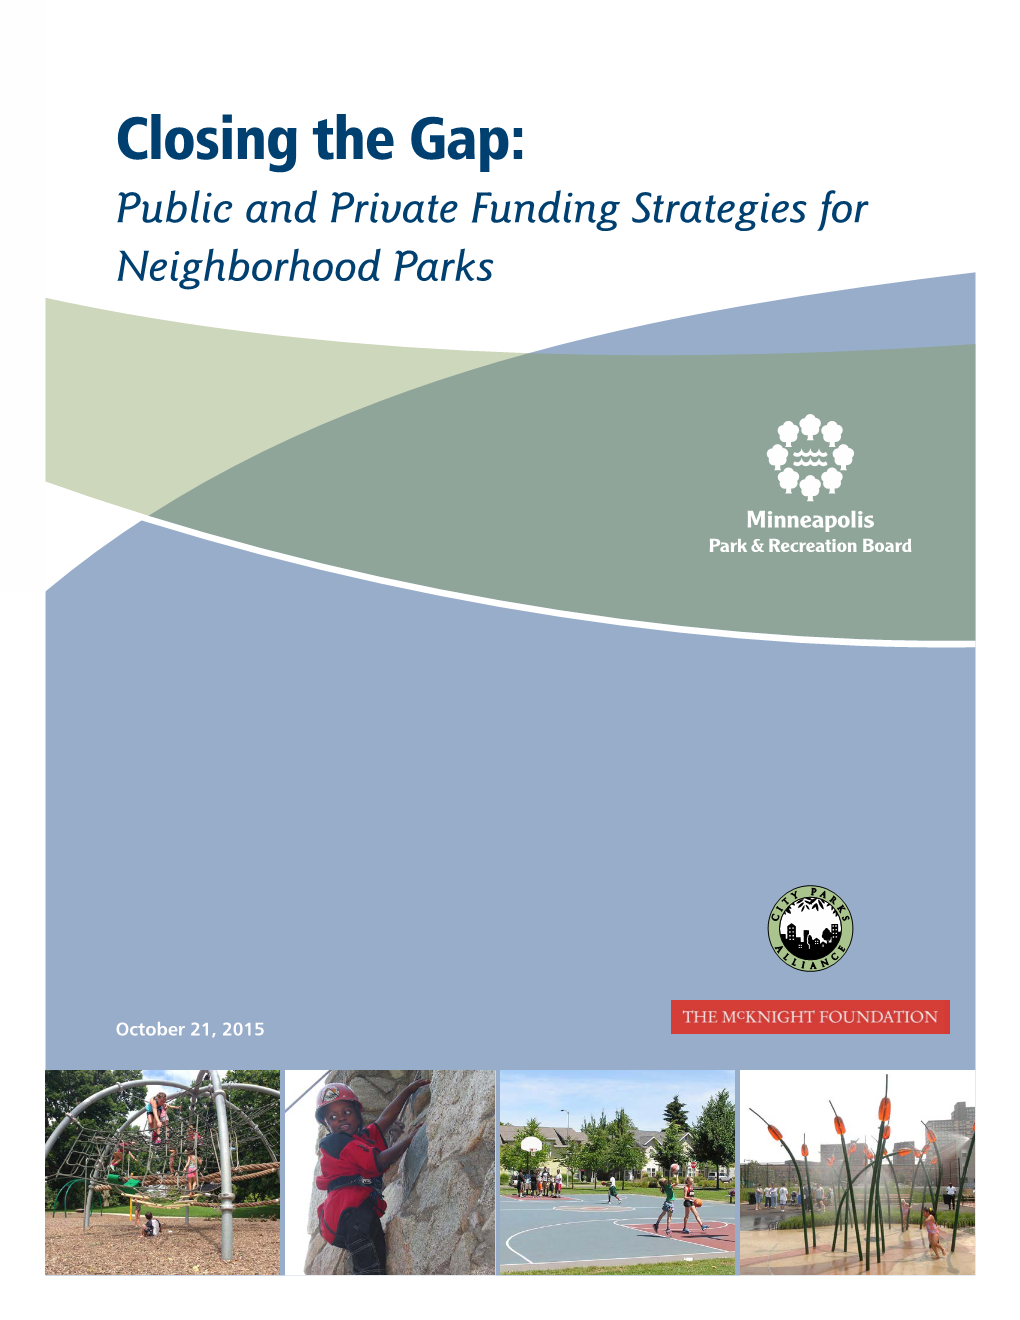 Closing the Gap: Public and Private Funding Strategies for Neighborhood Parks